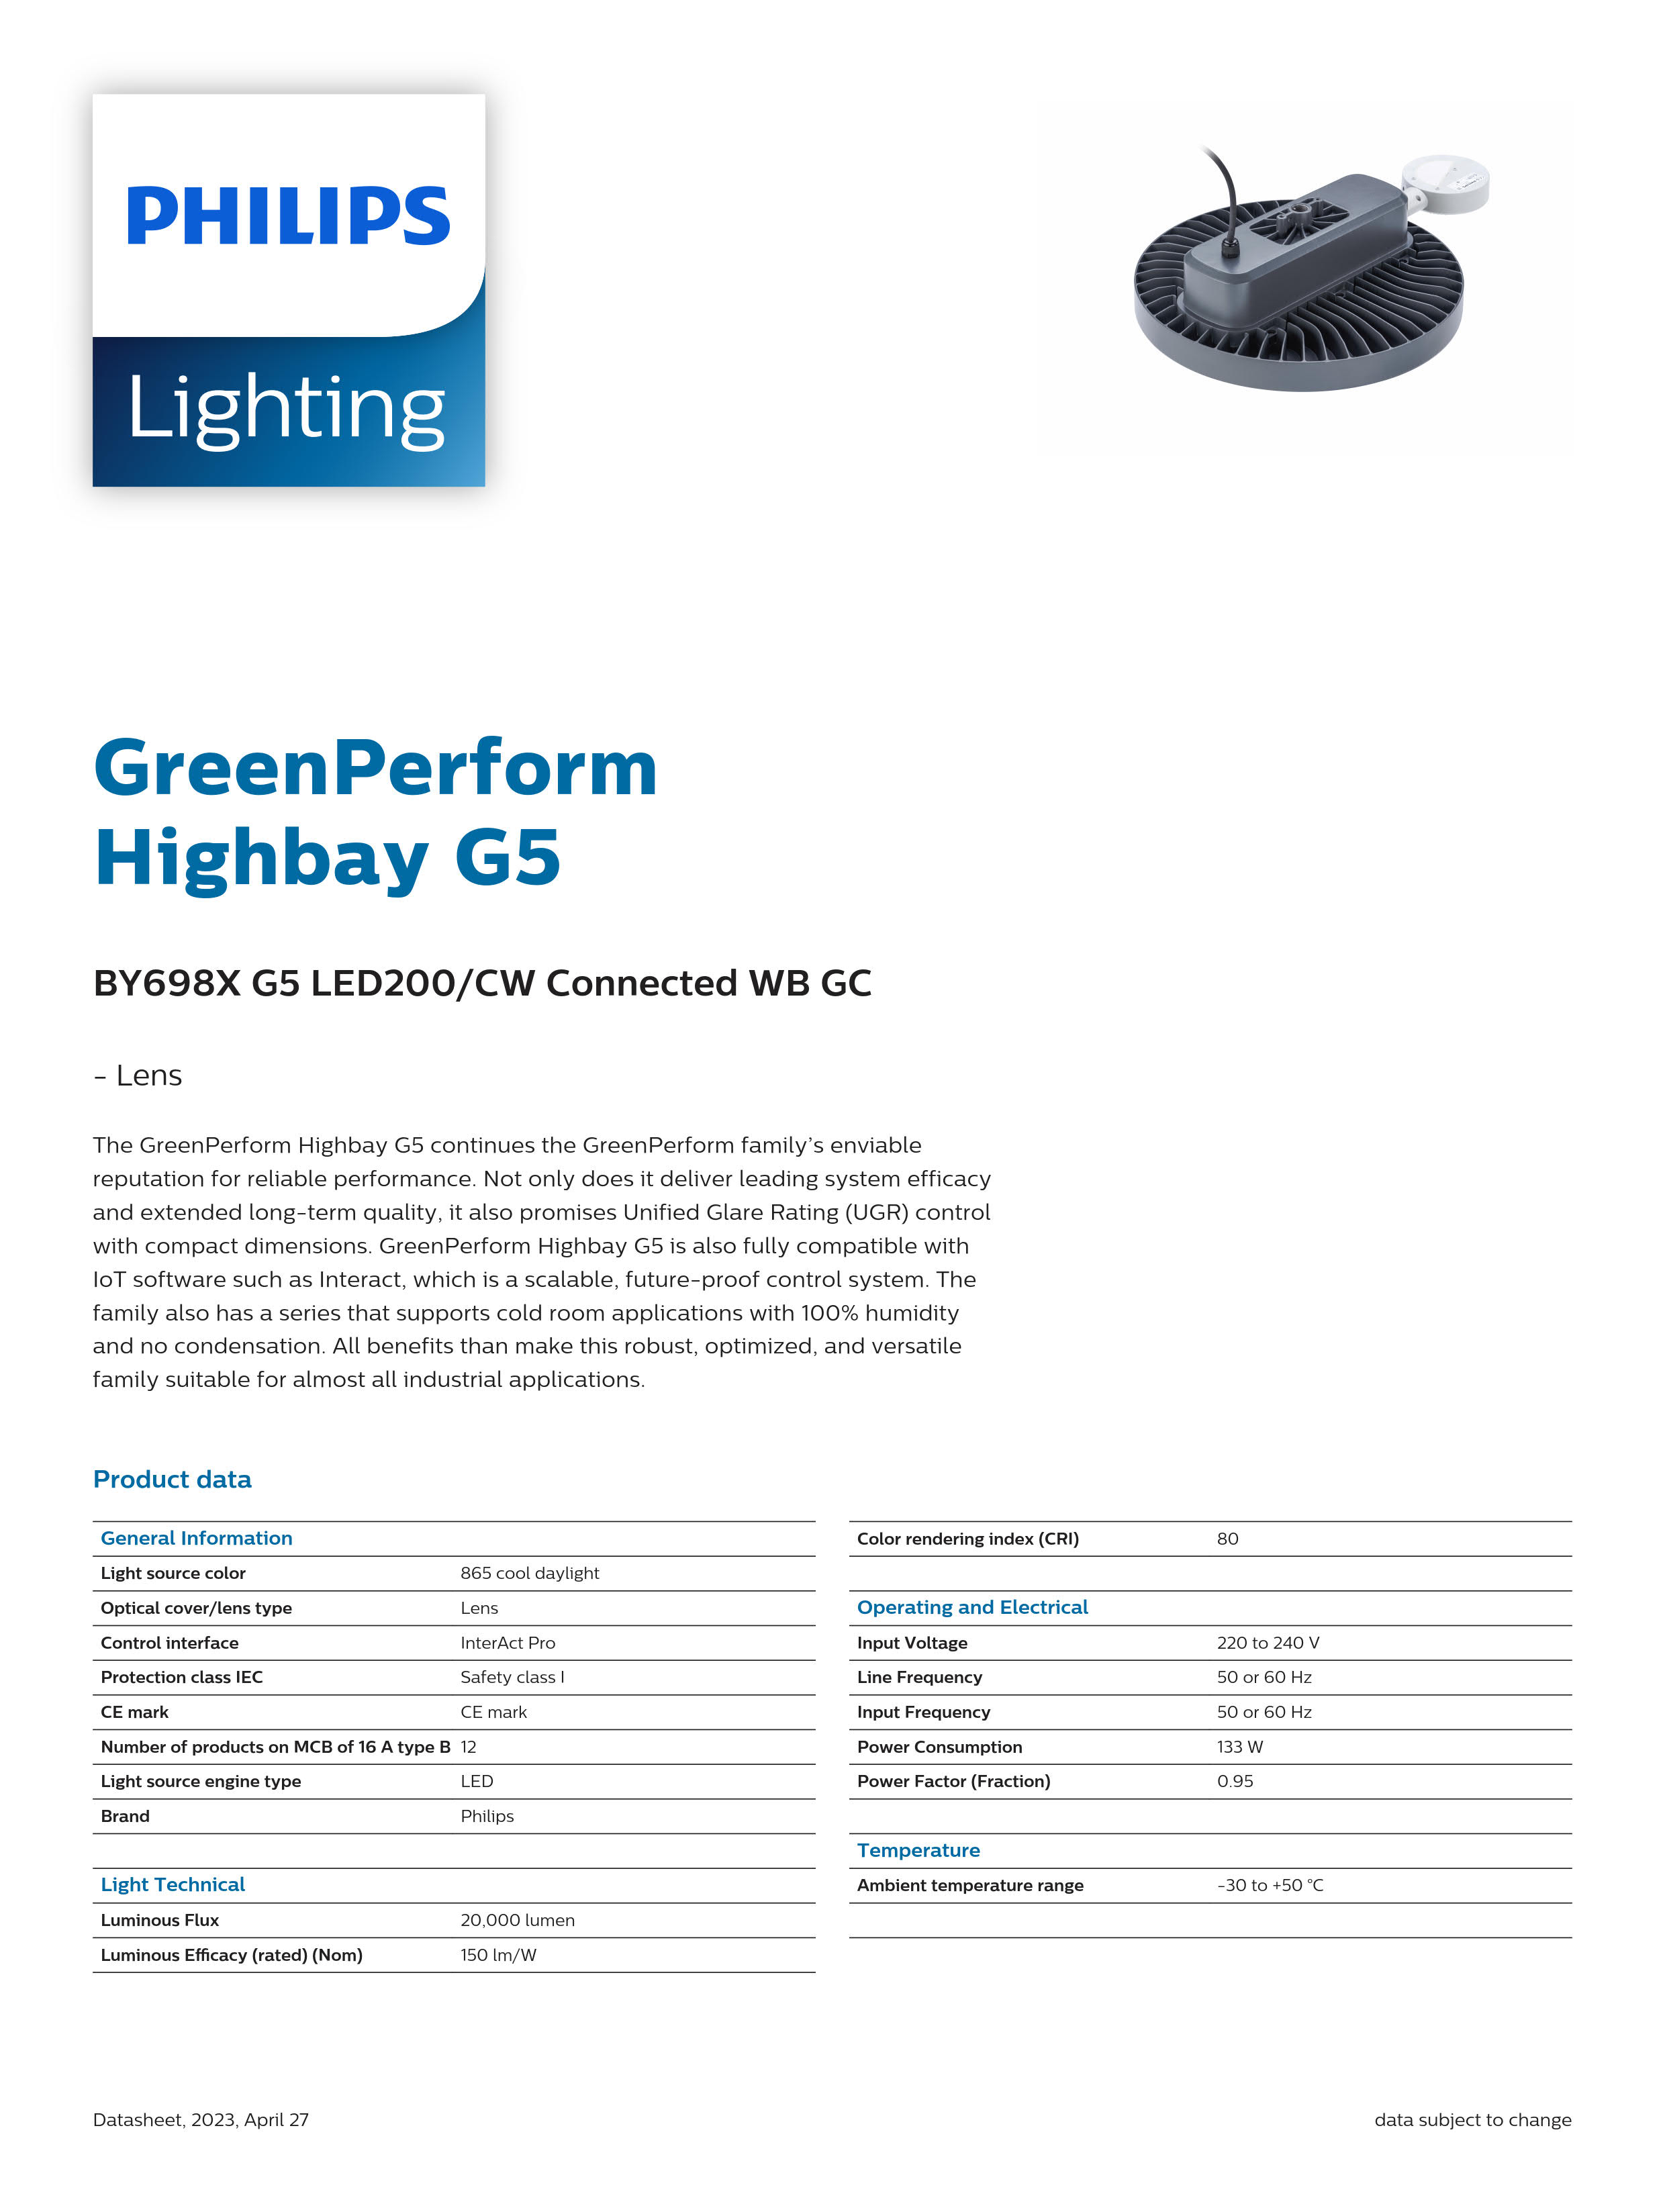 PHILIPS Highbay BY698X G5 LED200/CW Connected WB GC 911401524591